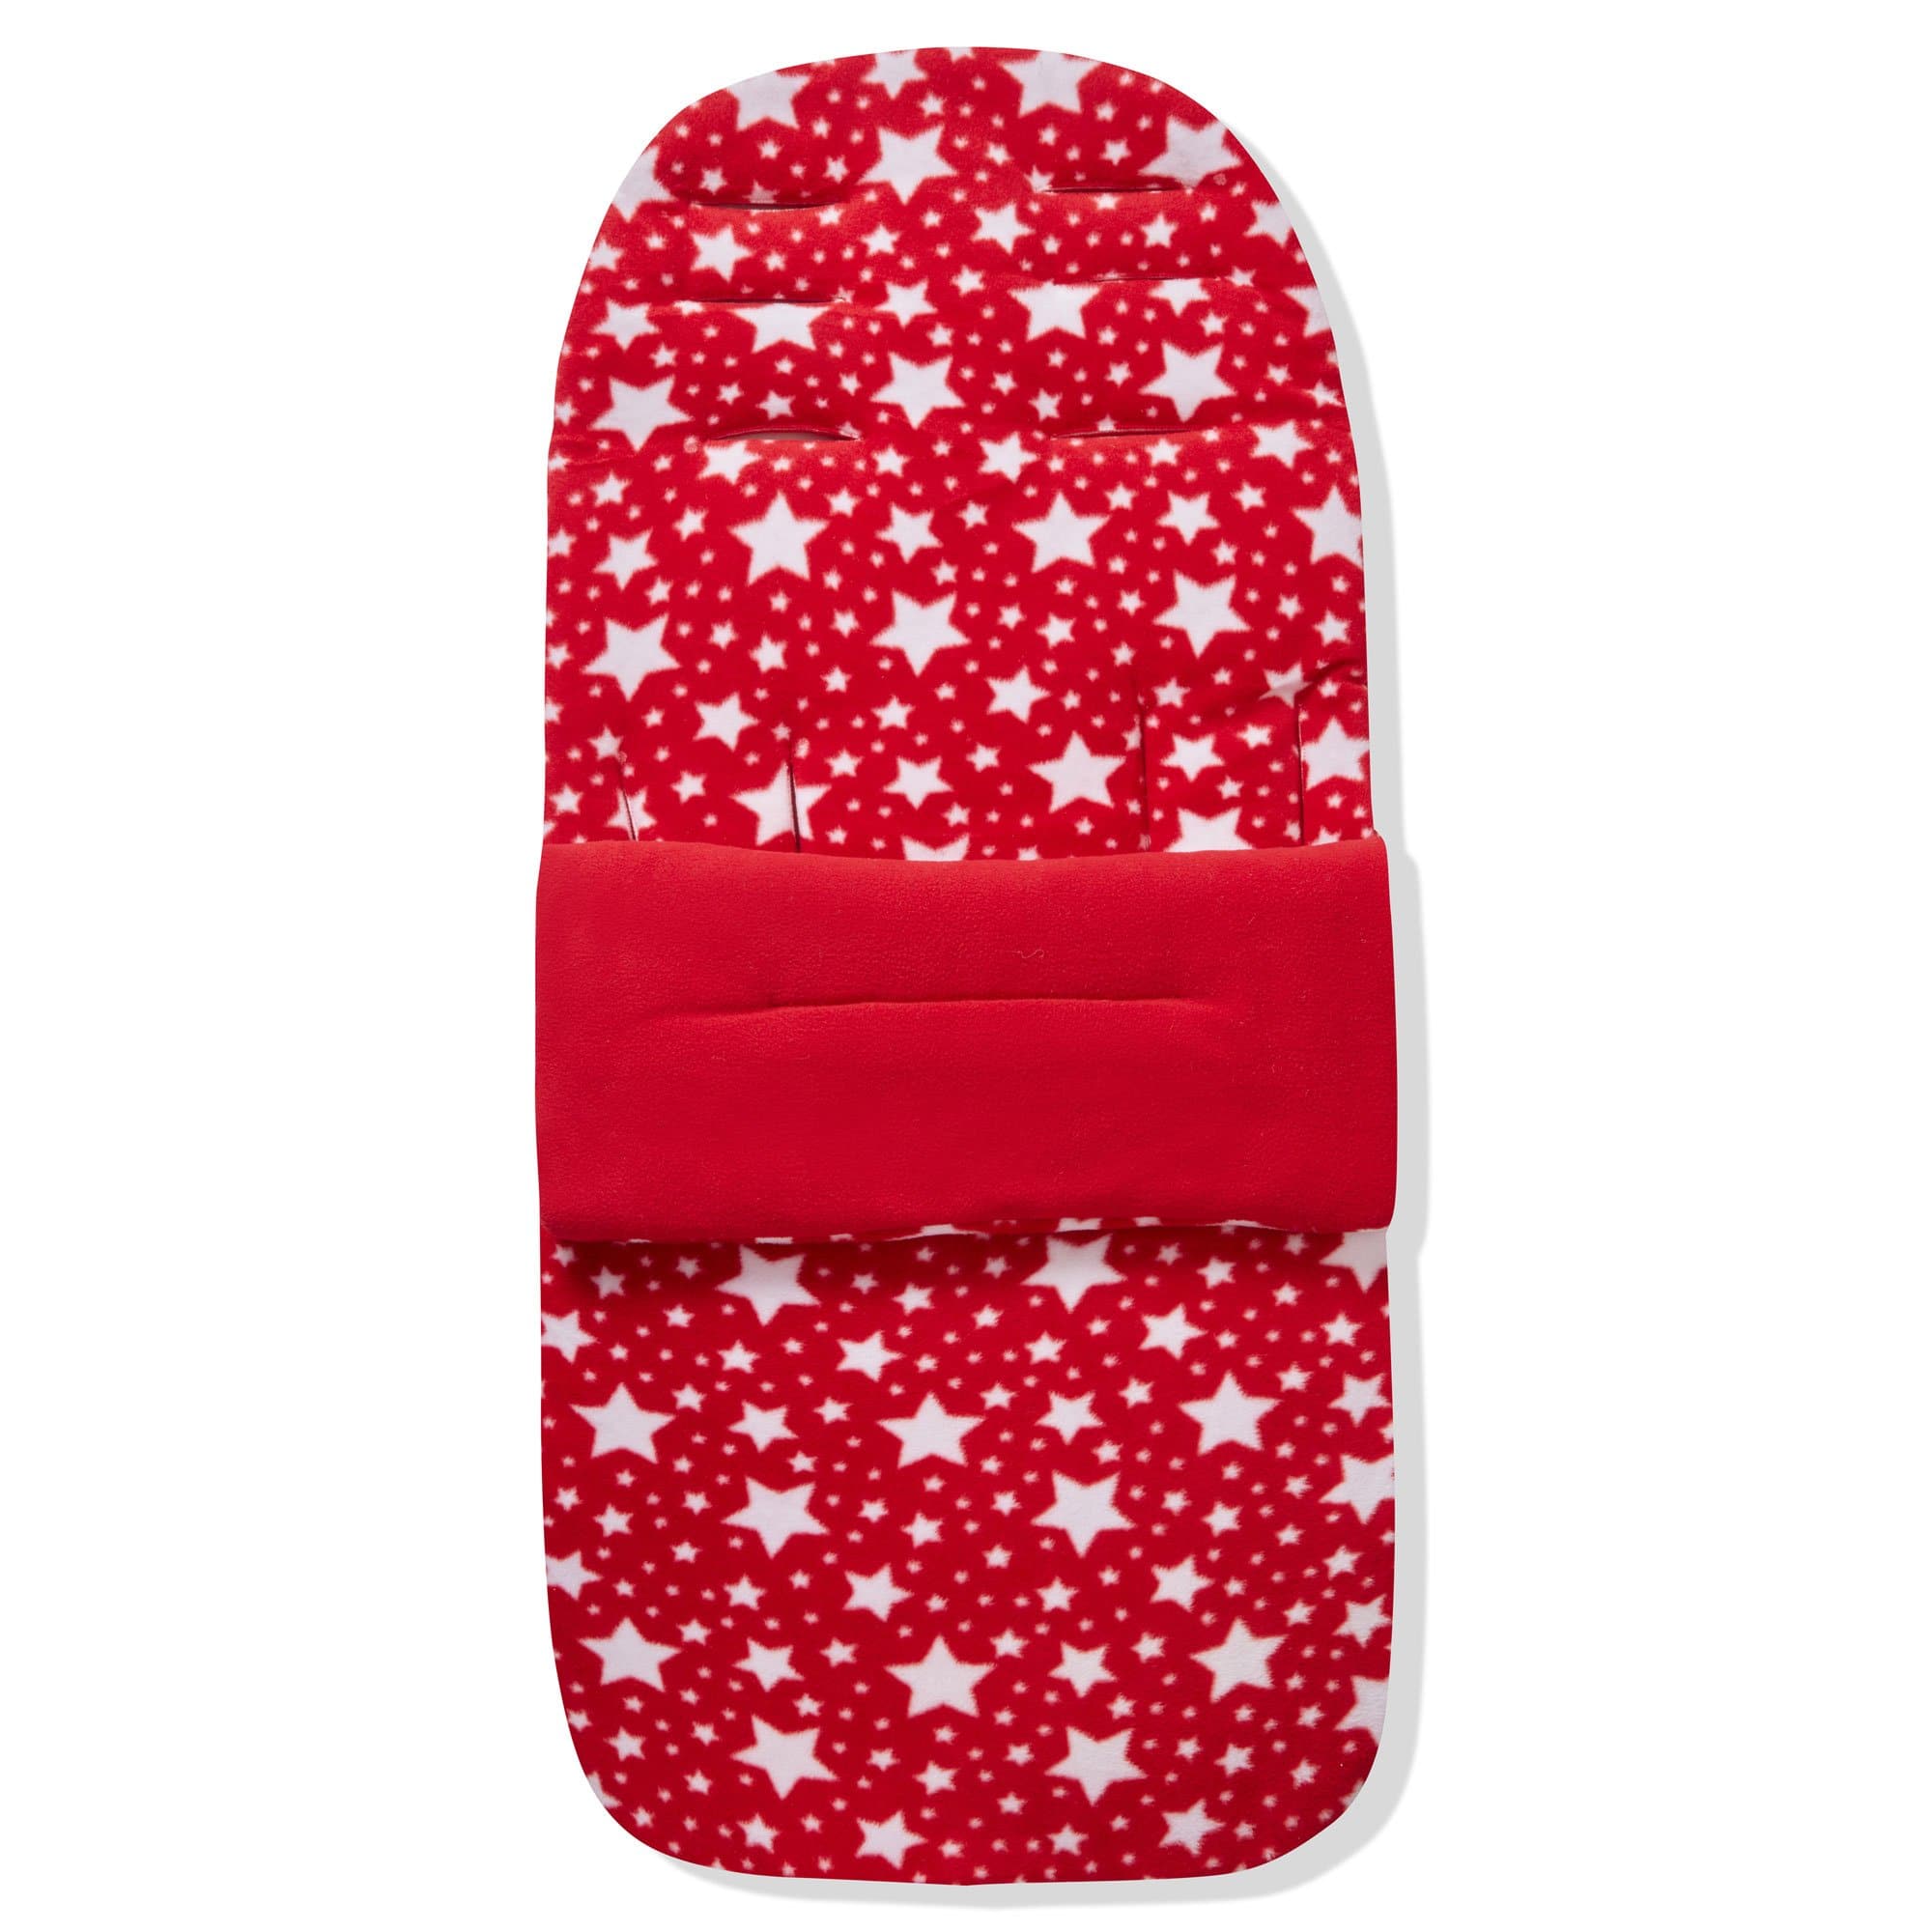 Fleece Footmuff / Cosy Toes Compatible with Urban Detour - Red Star / Fits All Models | For Your Little One